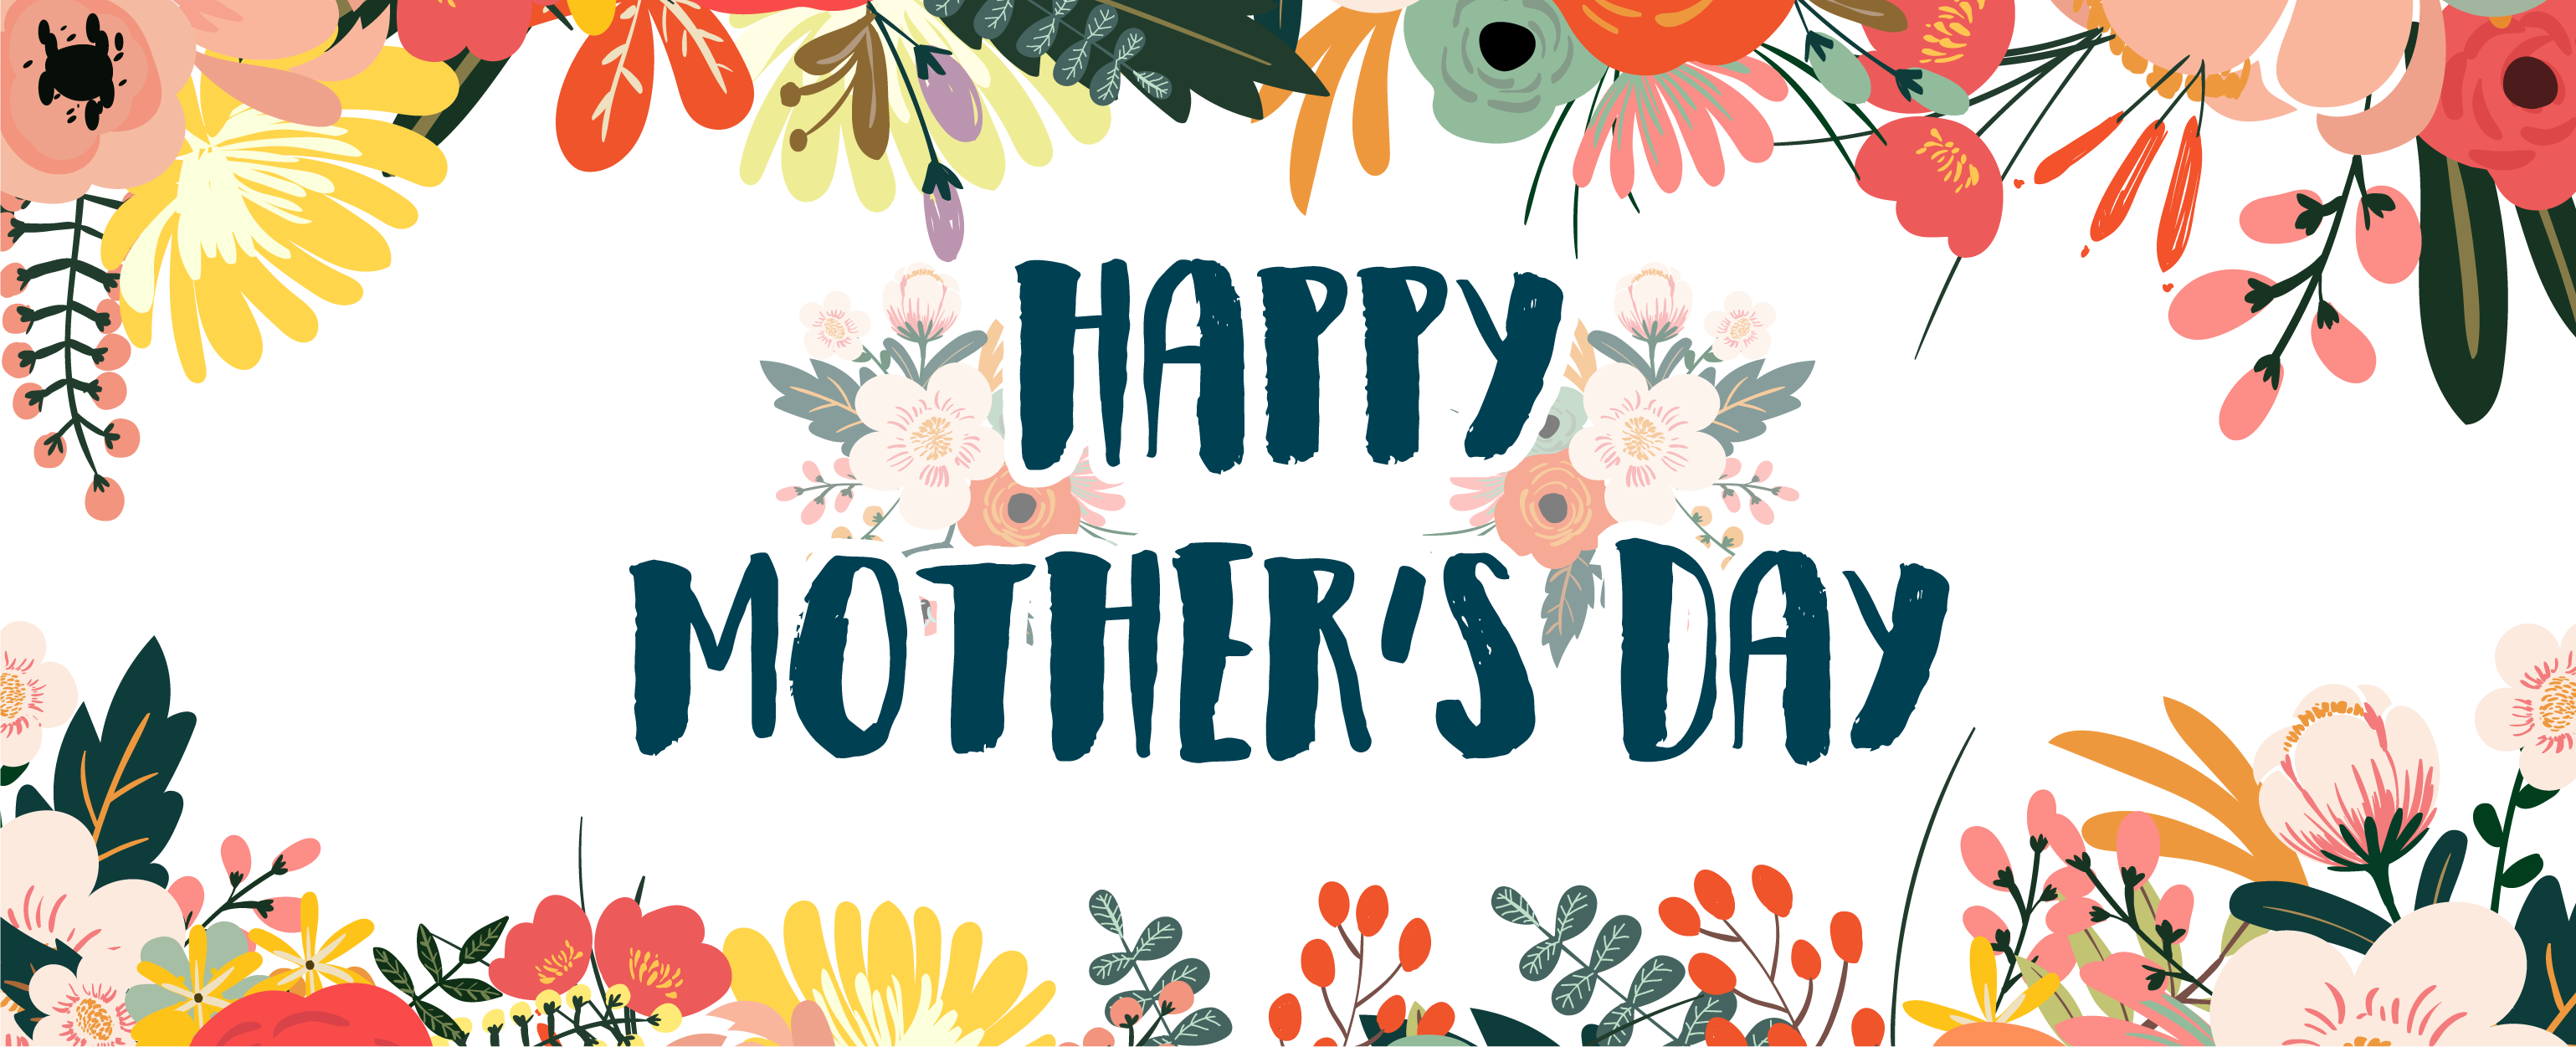 Free Happy Mothers Day Png Transparent, Download Free Happy Mothers Day